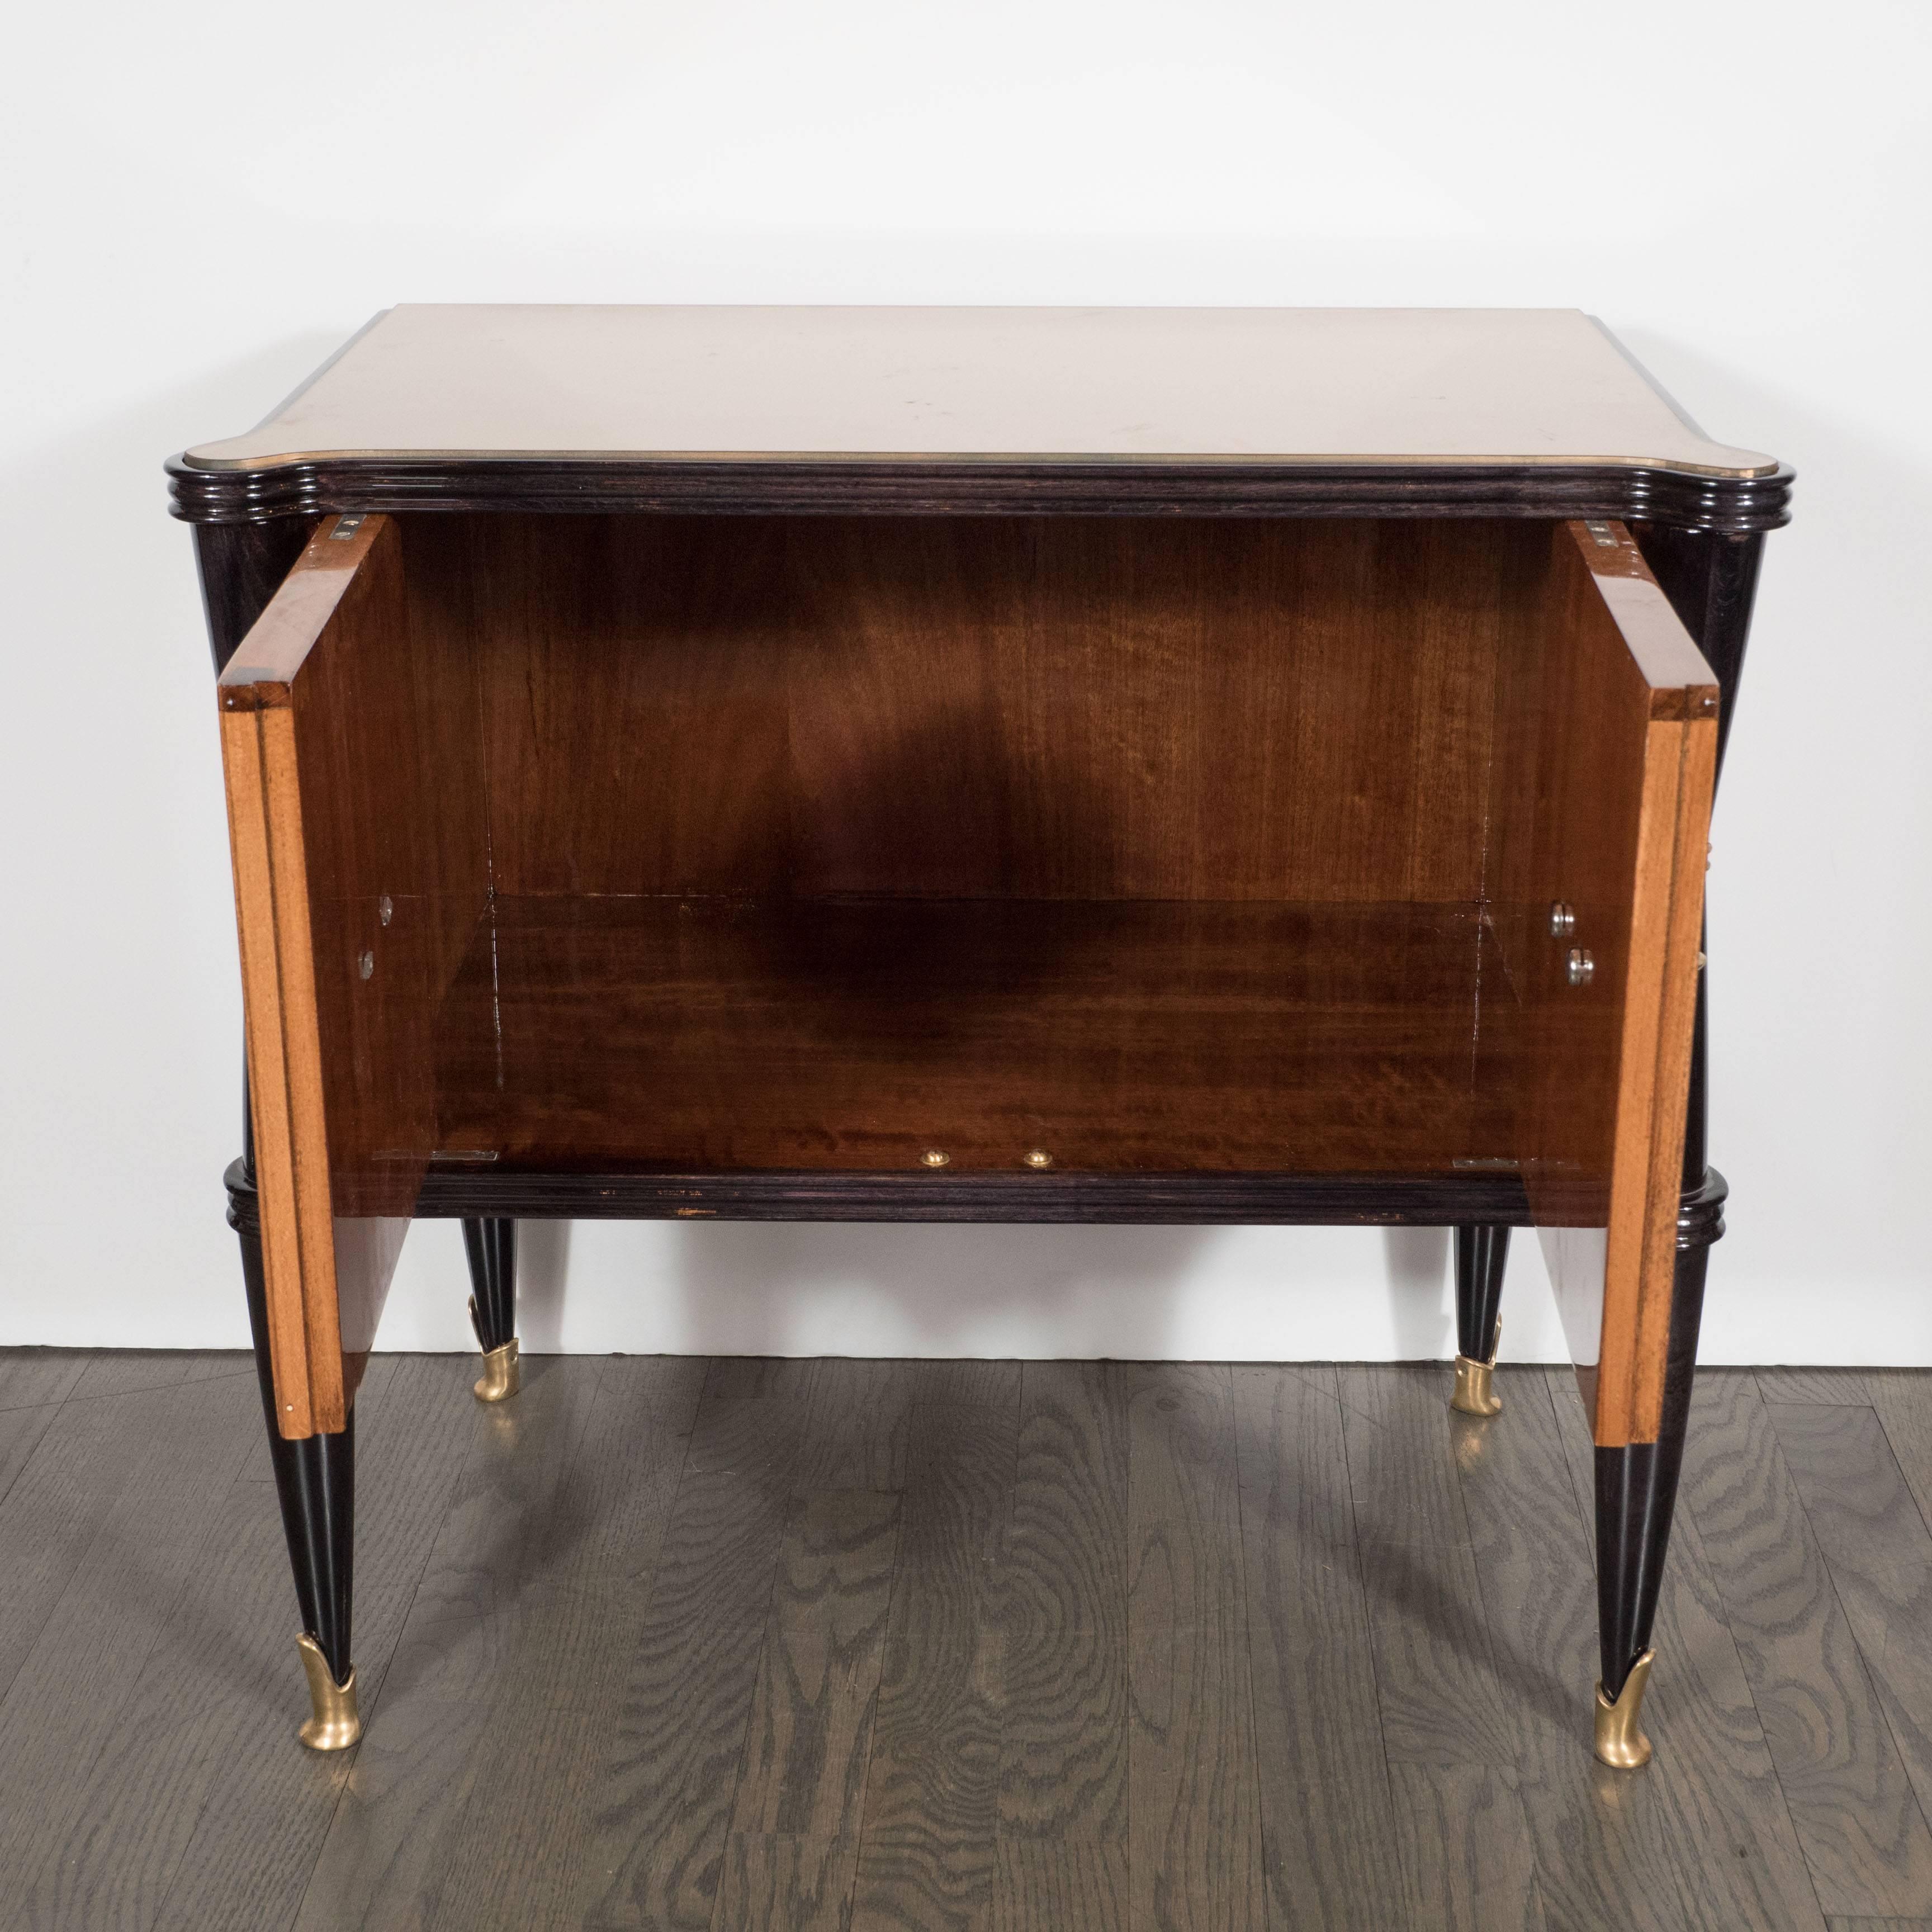 A pair of Mid-Century Modernist nightstands or end tables in rosewood with reversed painted gold mirror tops, gilt and brass detailing. 
Each with a pair of doors in beautifully grained rosewood and a stylish gilt and brass pull. The table tops